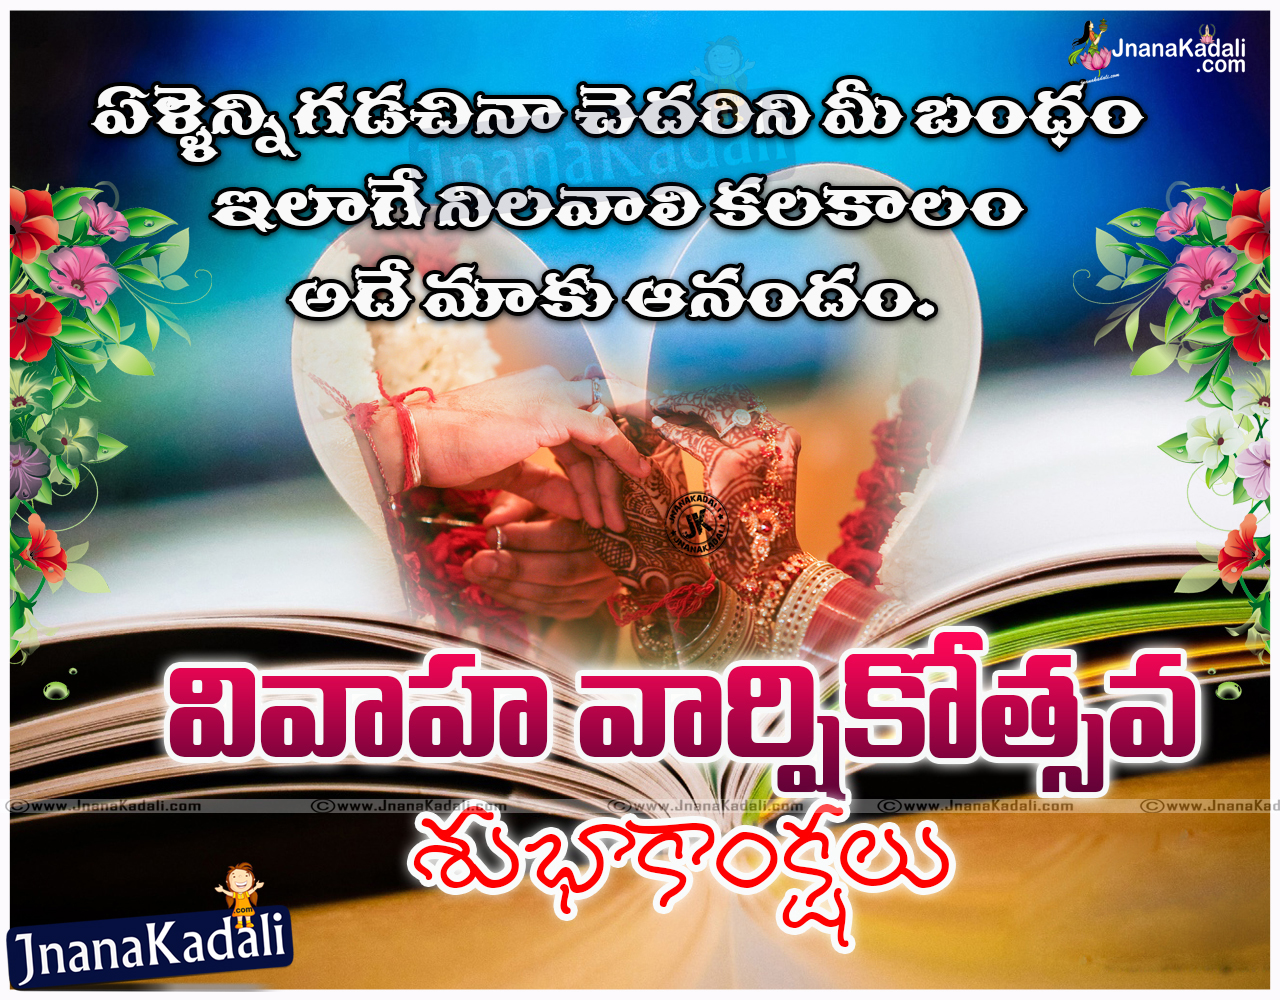 Telugu 2016 New Marriage Anniversary Wedding Day Messages And